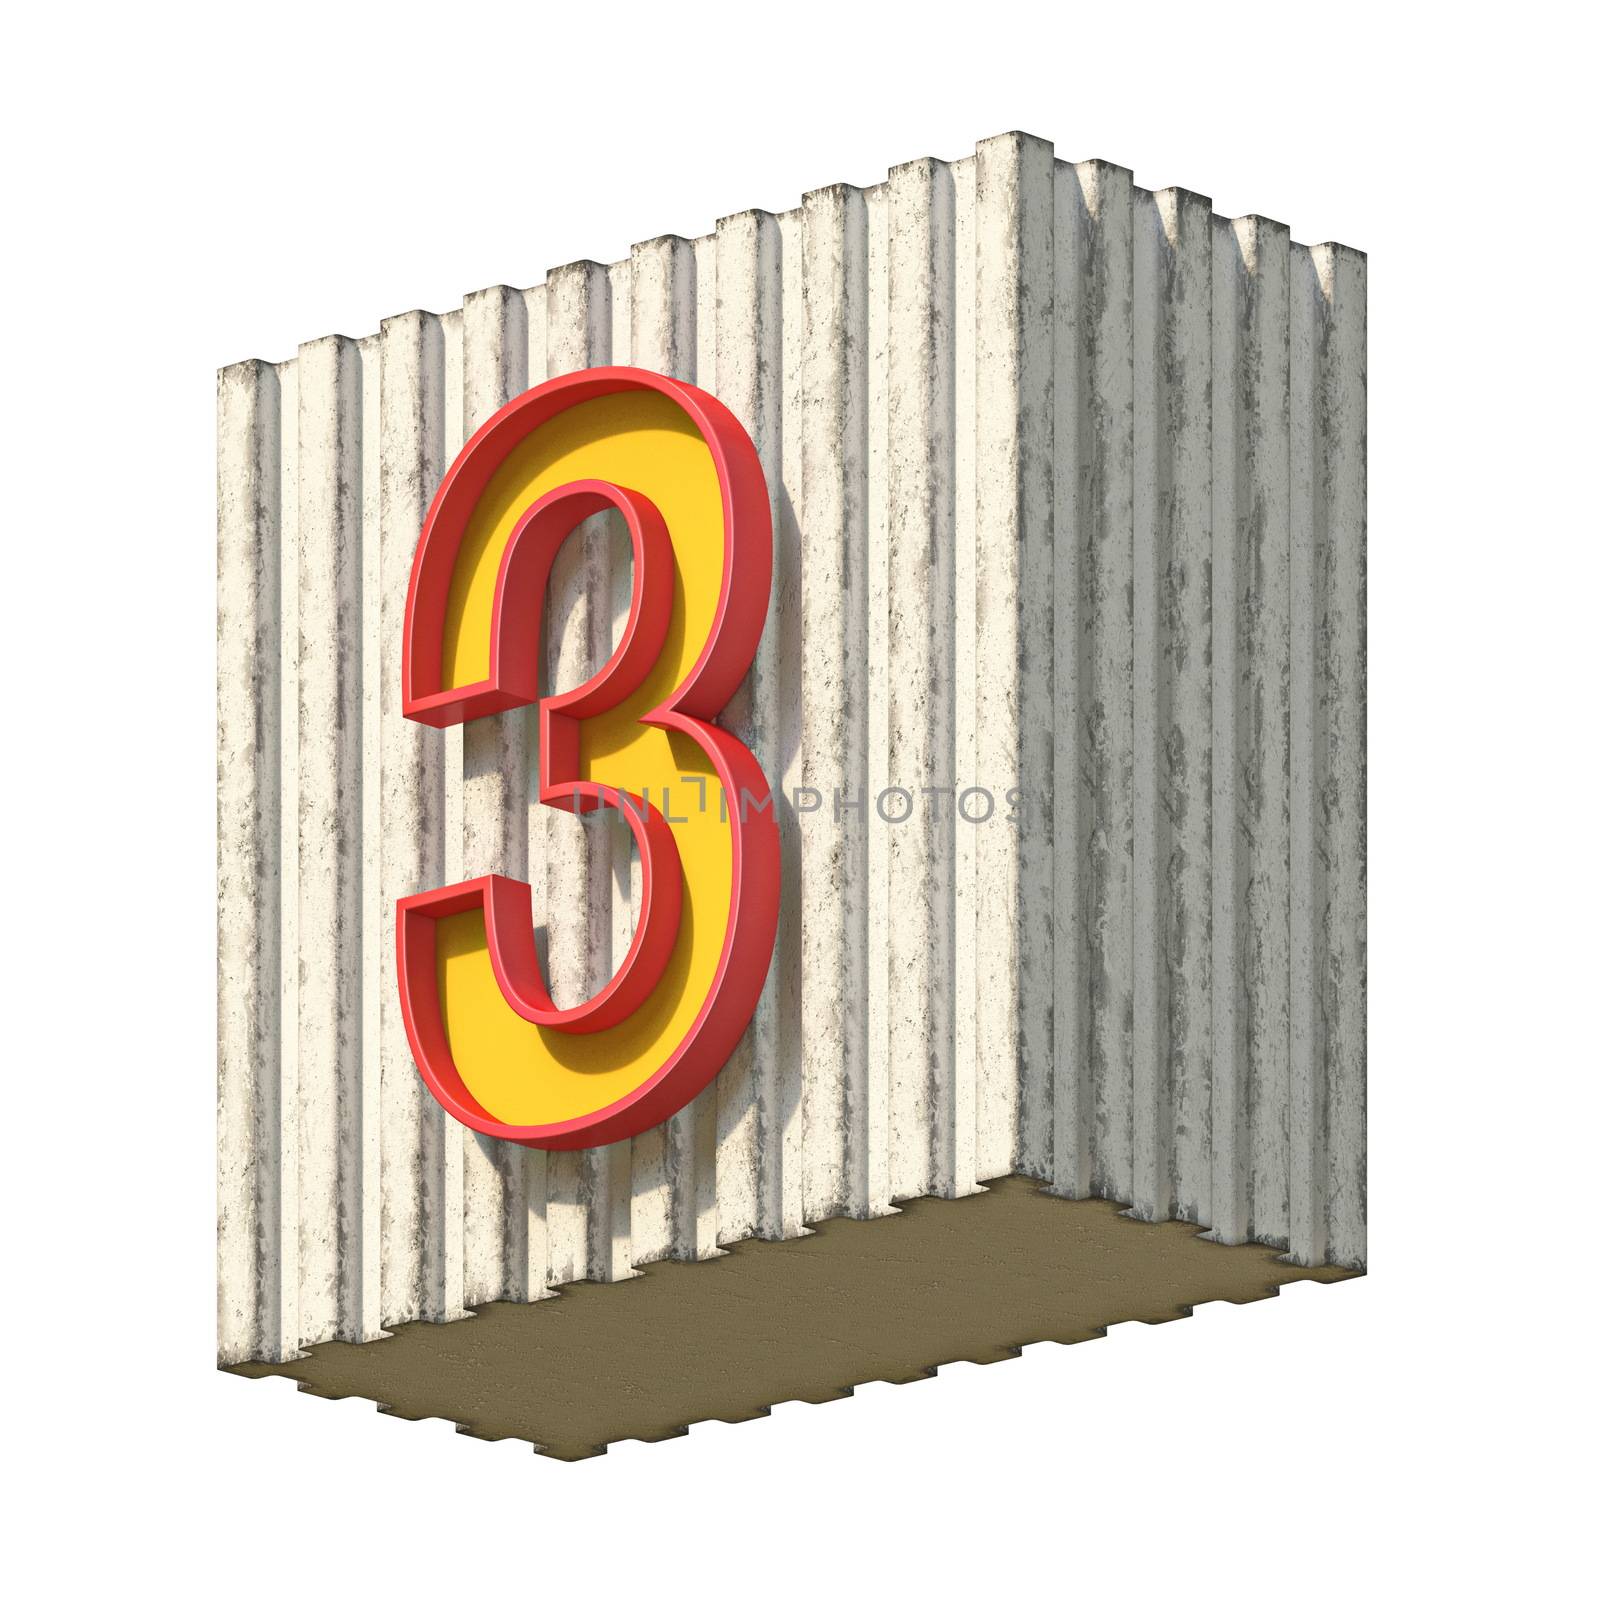 Vintage concrete red yellow Number 3 3D render illustration isolated on white background